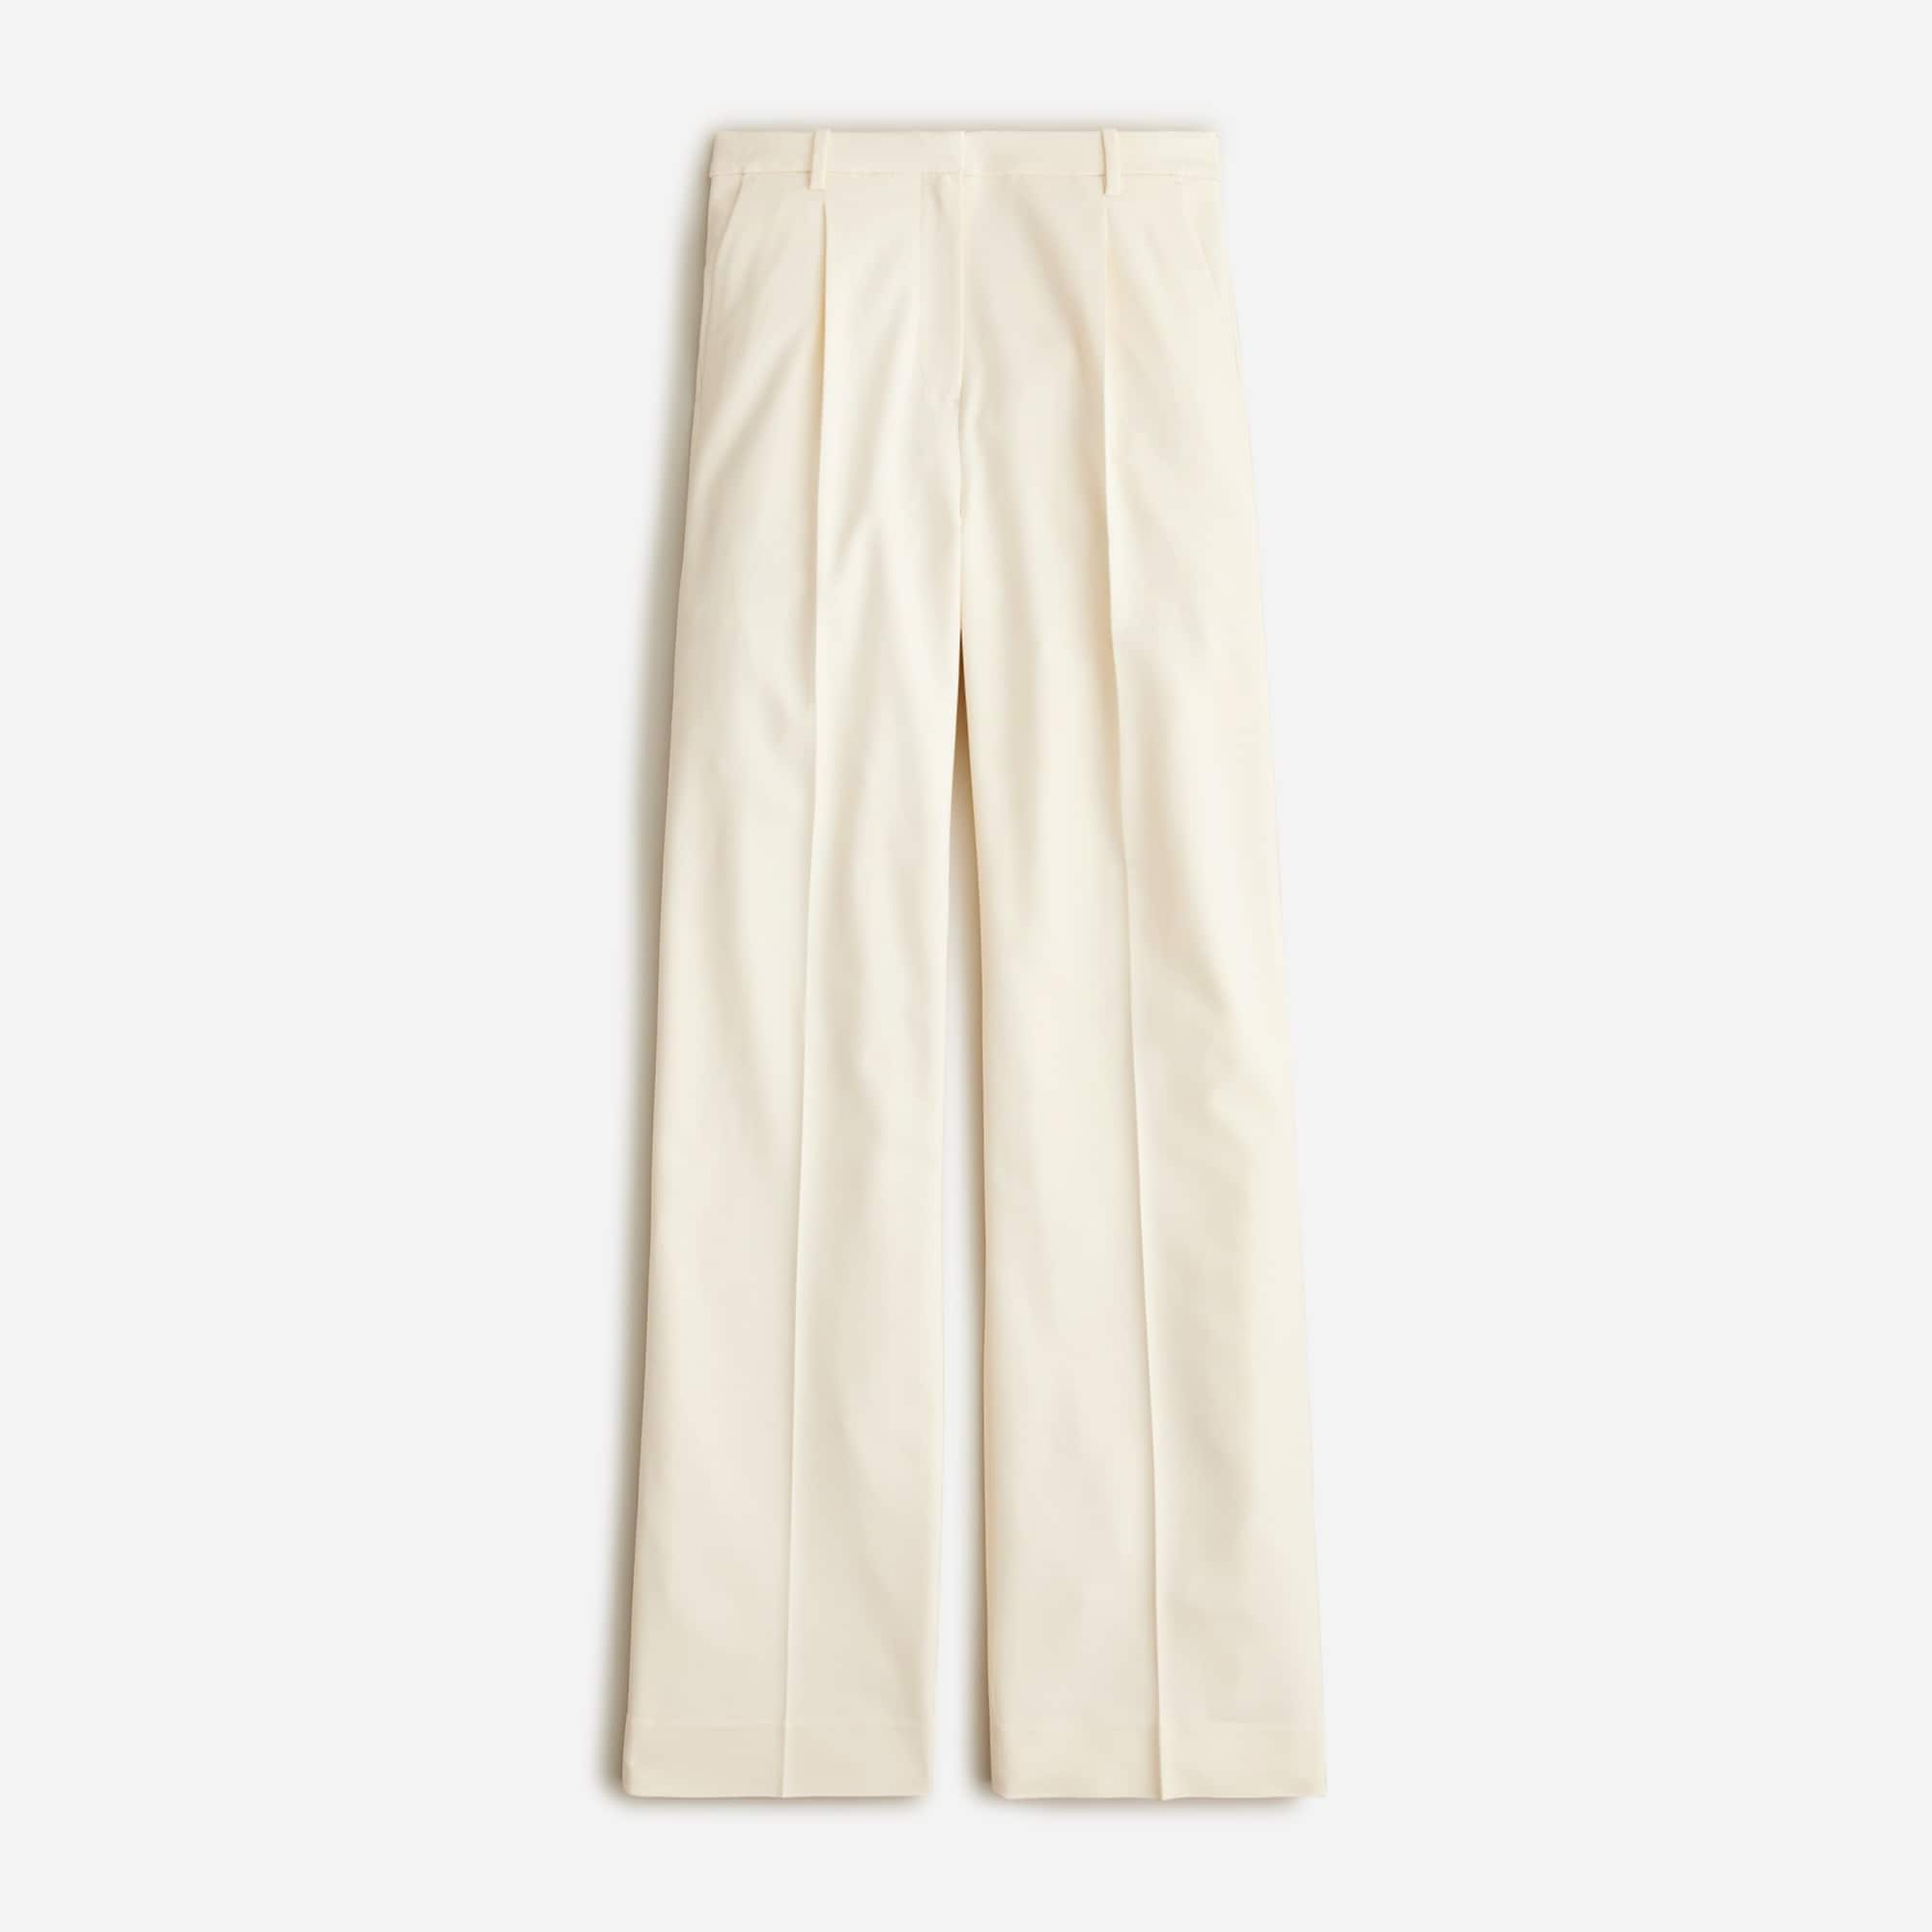  Tall wide-leg essential pant in city twill